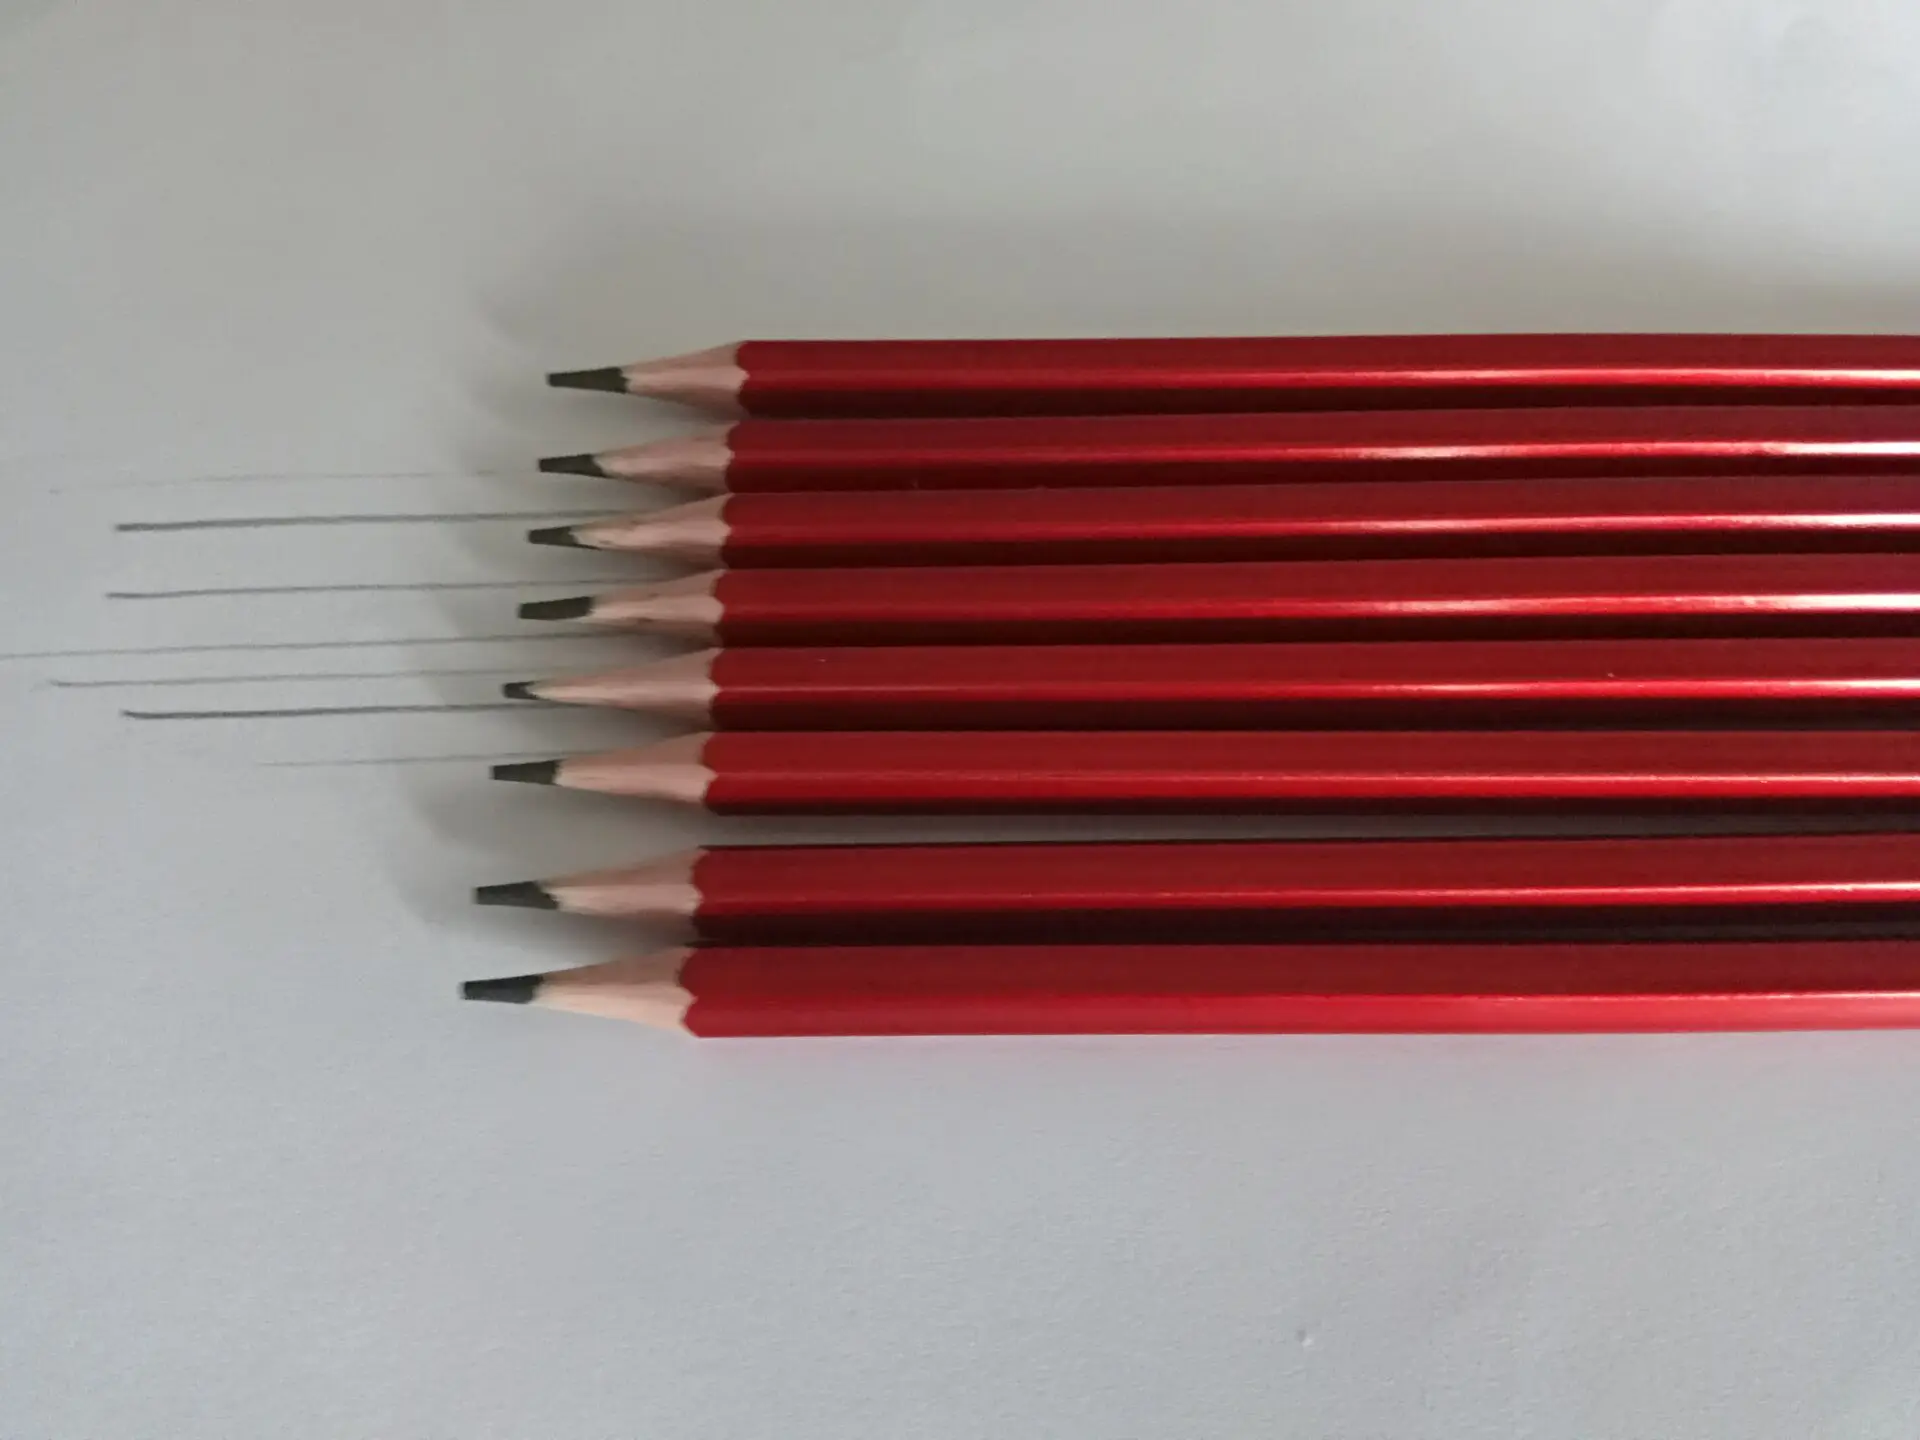 Flare Red Pencil (2).jpg